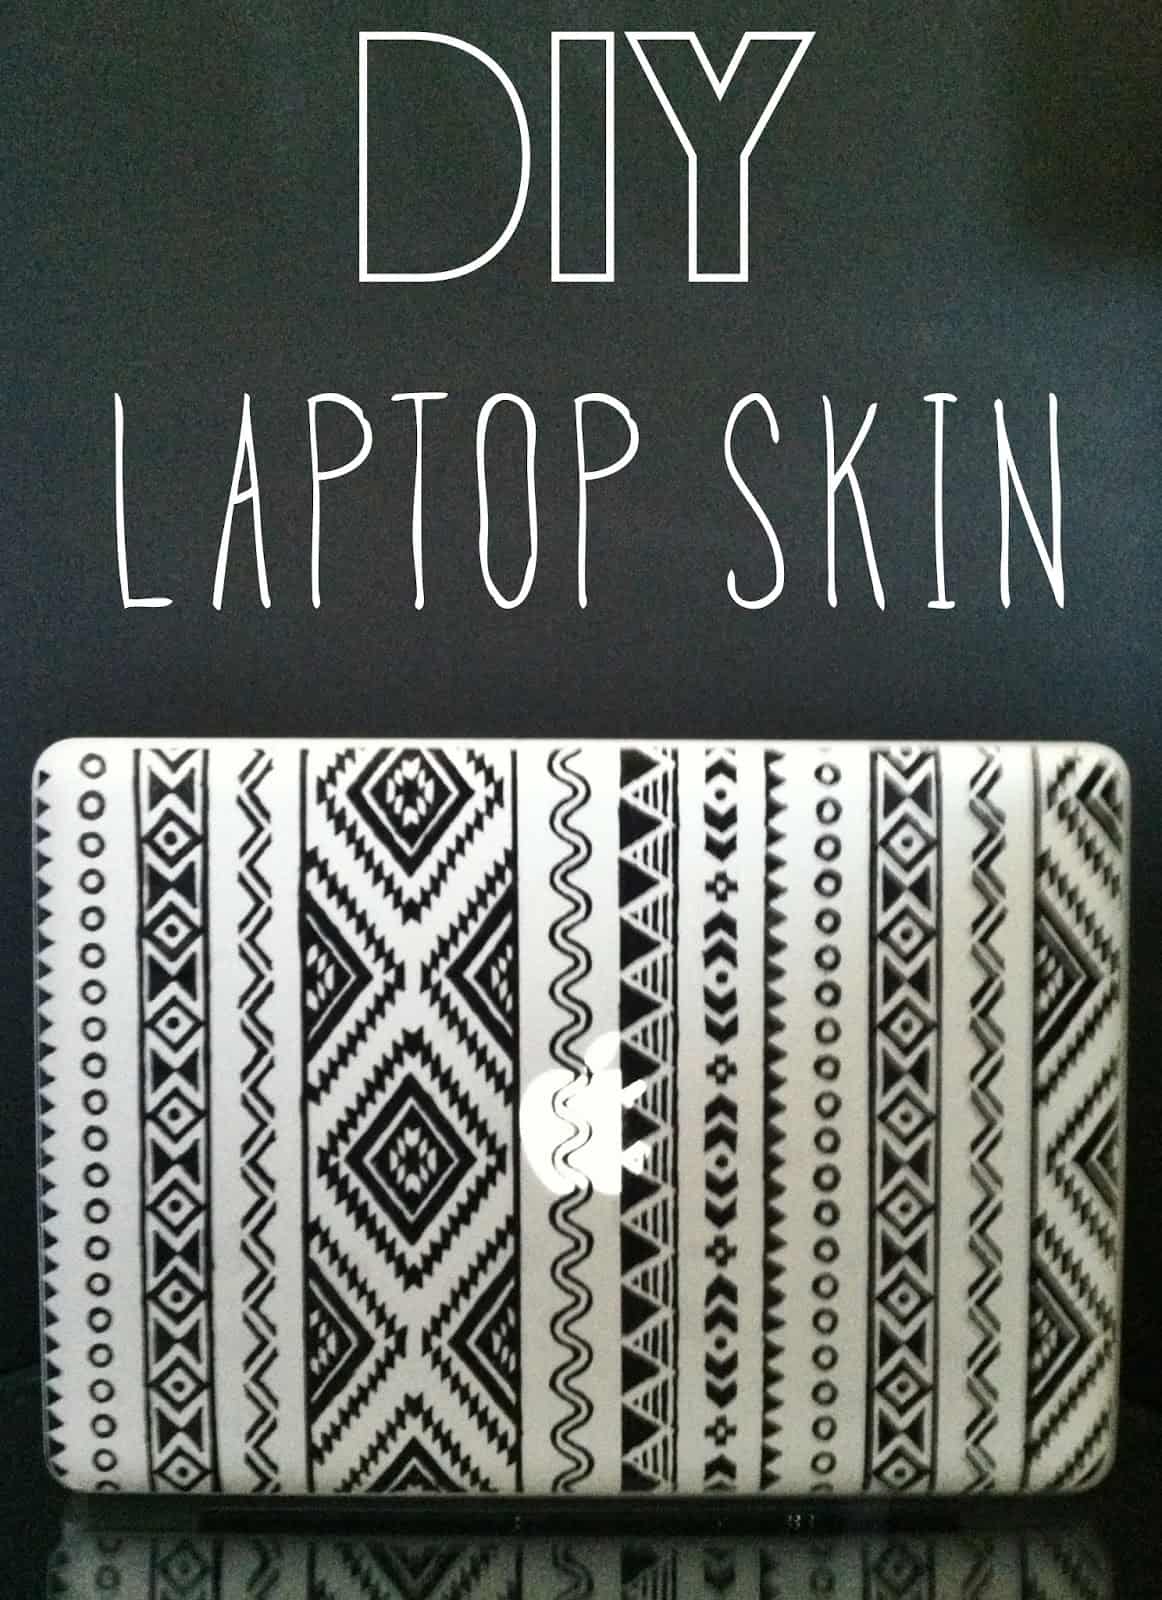 Printed wax paper and laminated notebook skin design